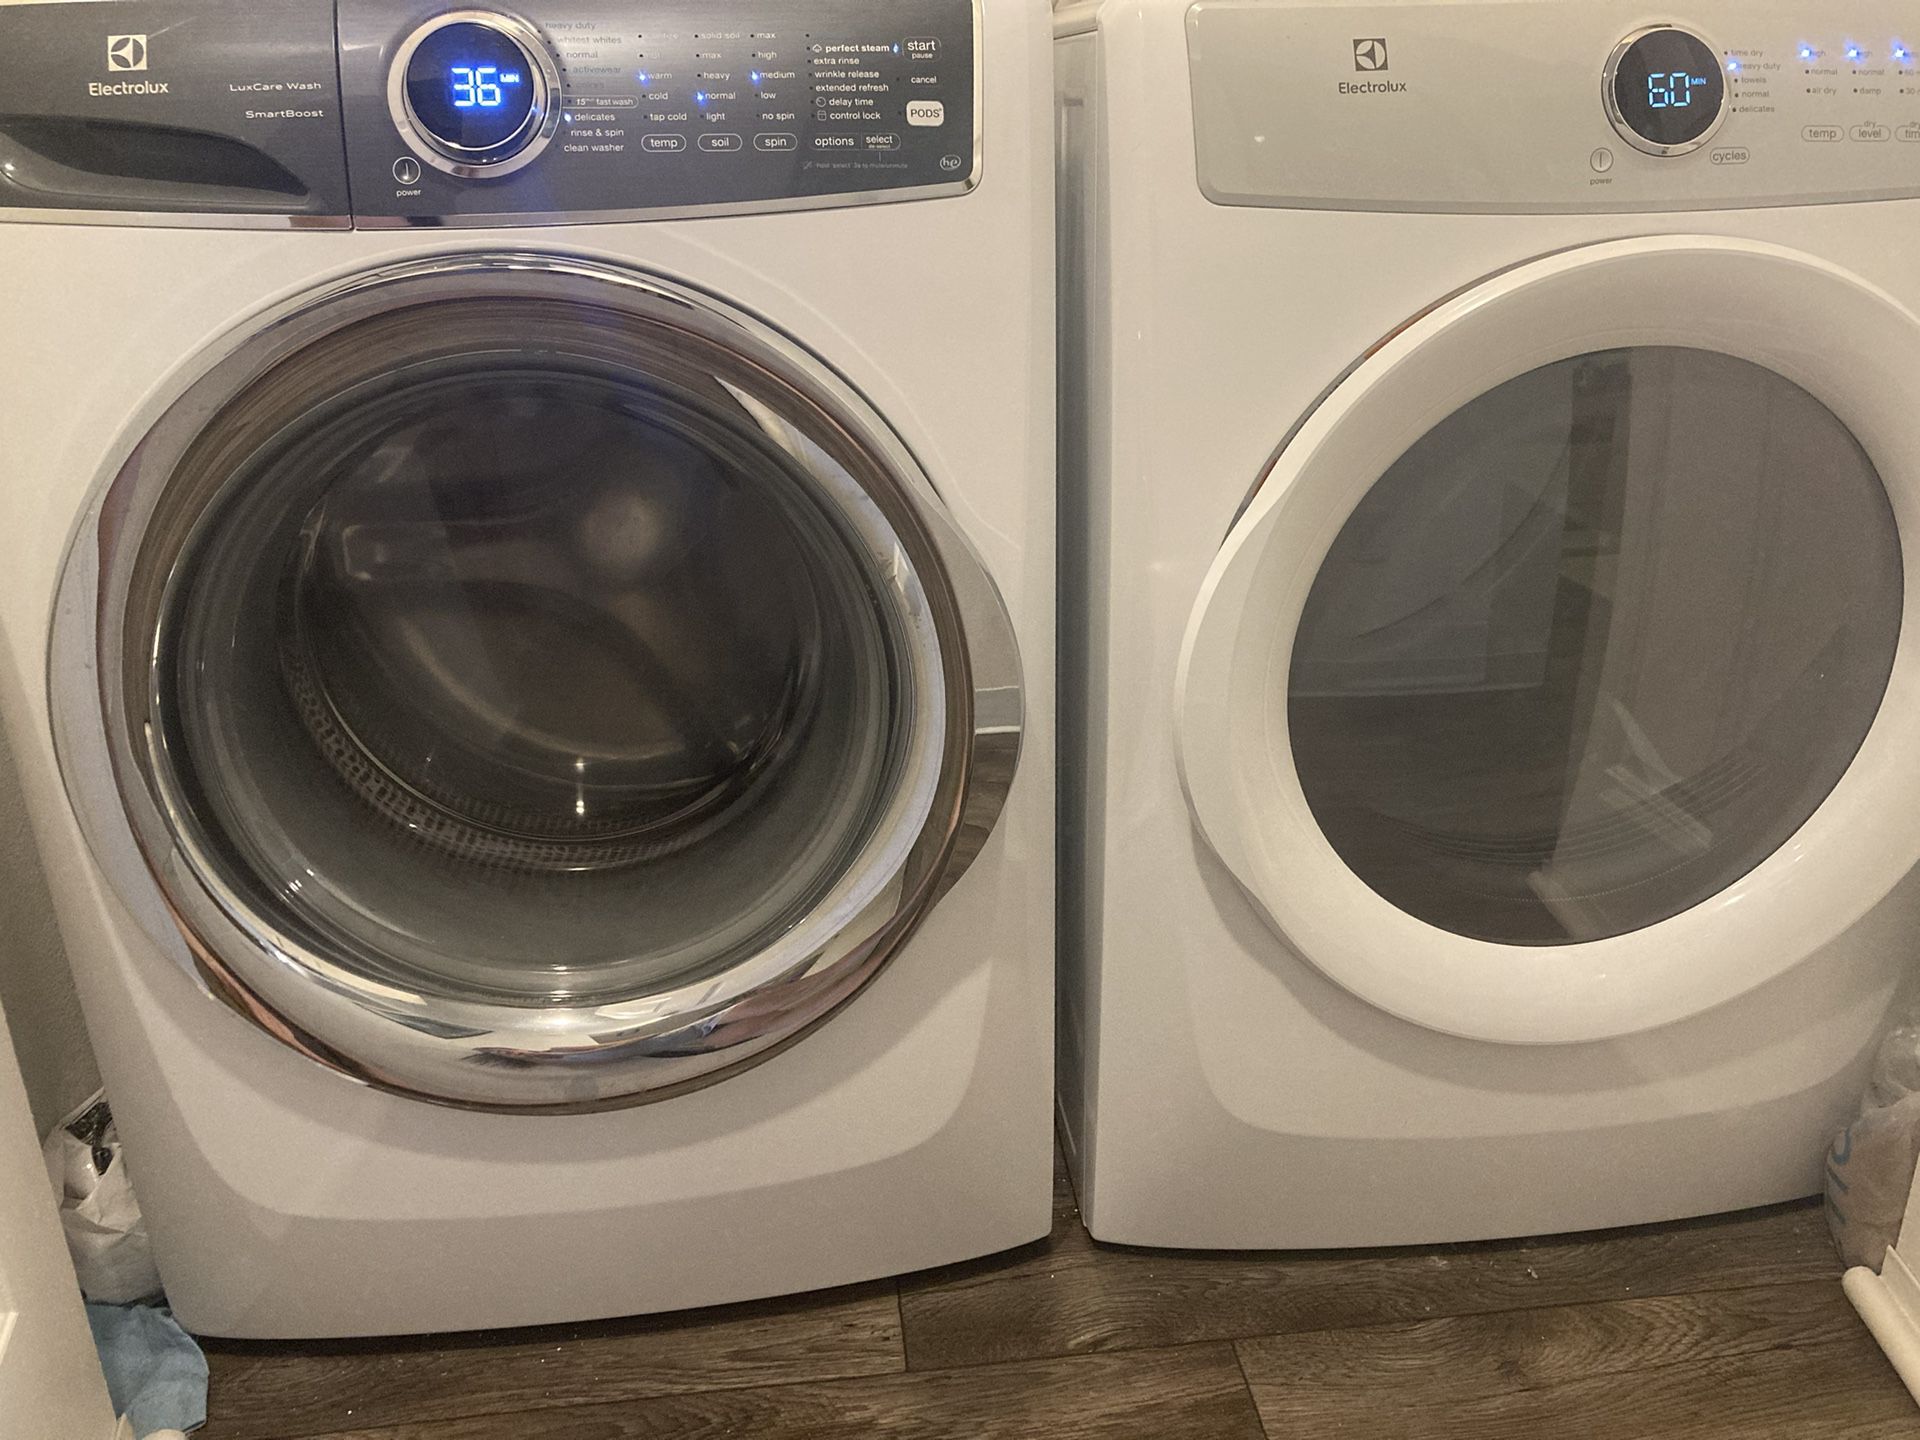 HE Electrolux Washer & Dryer